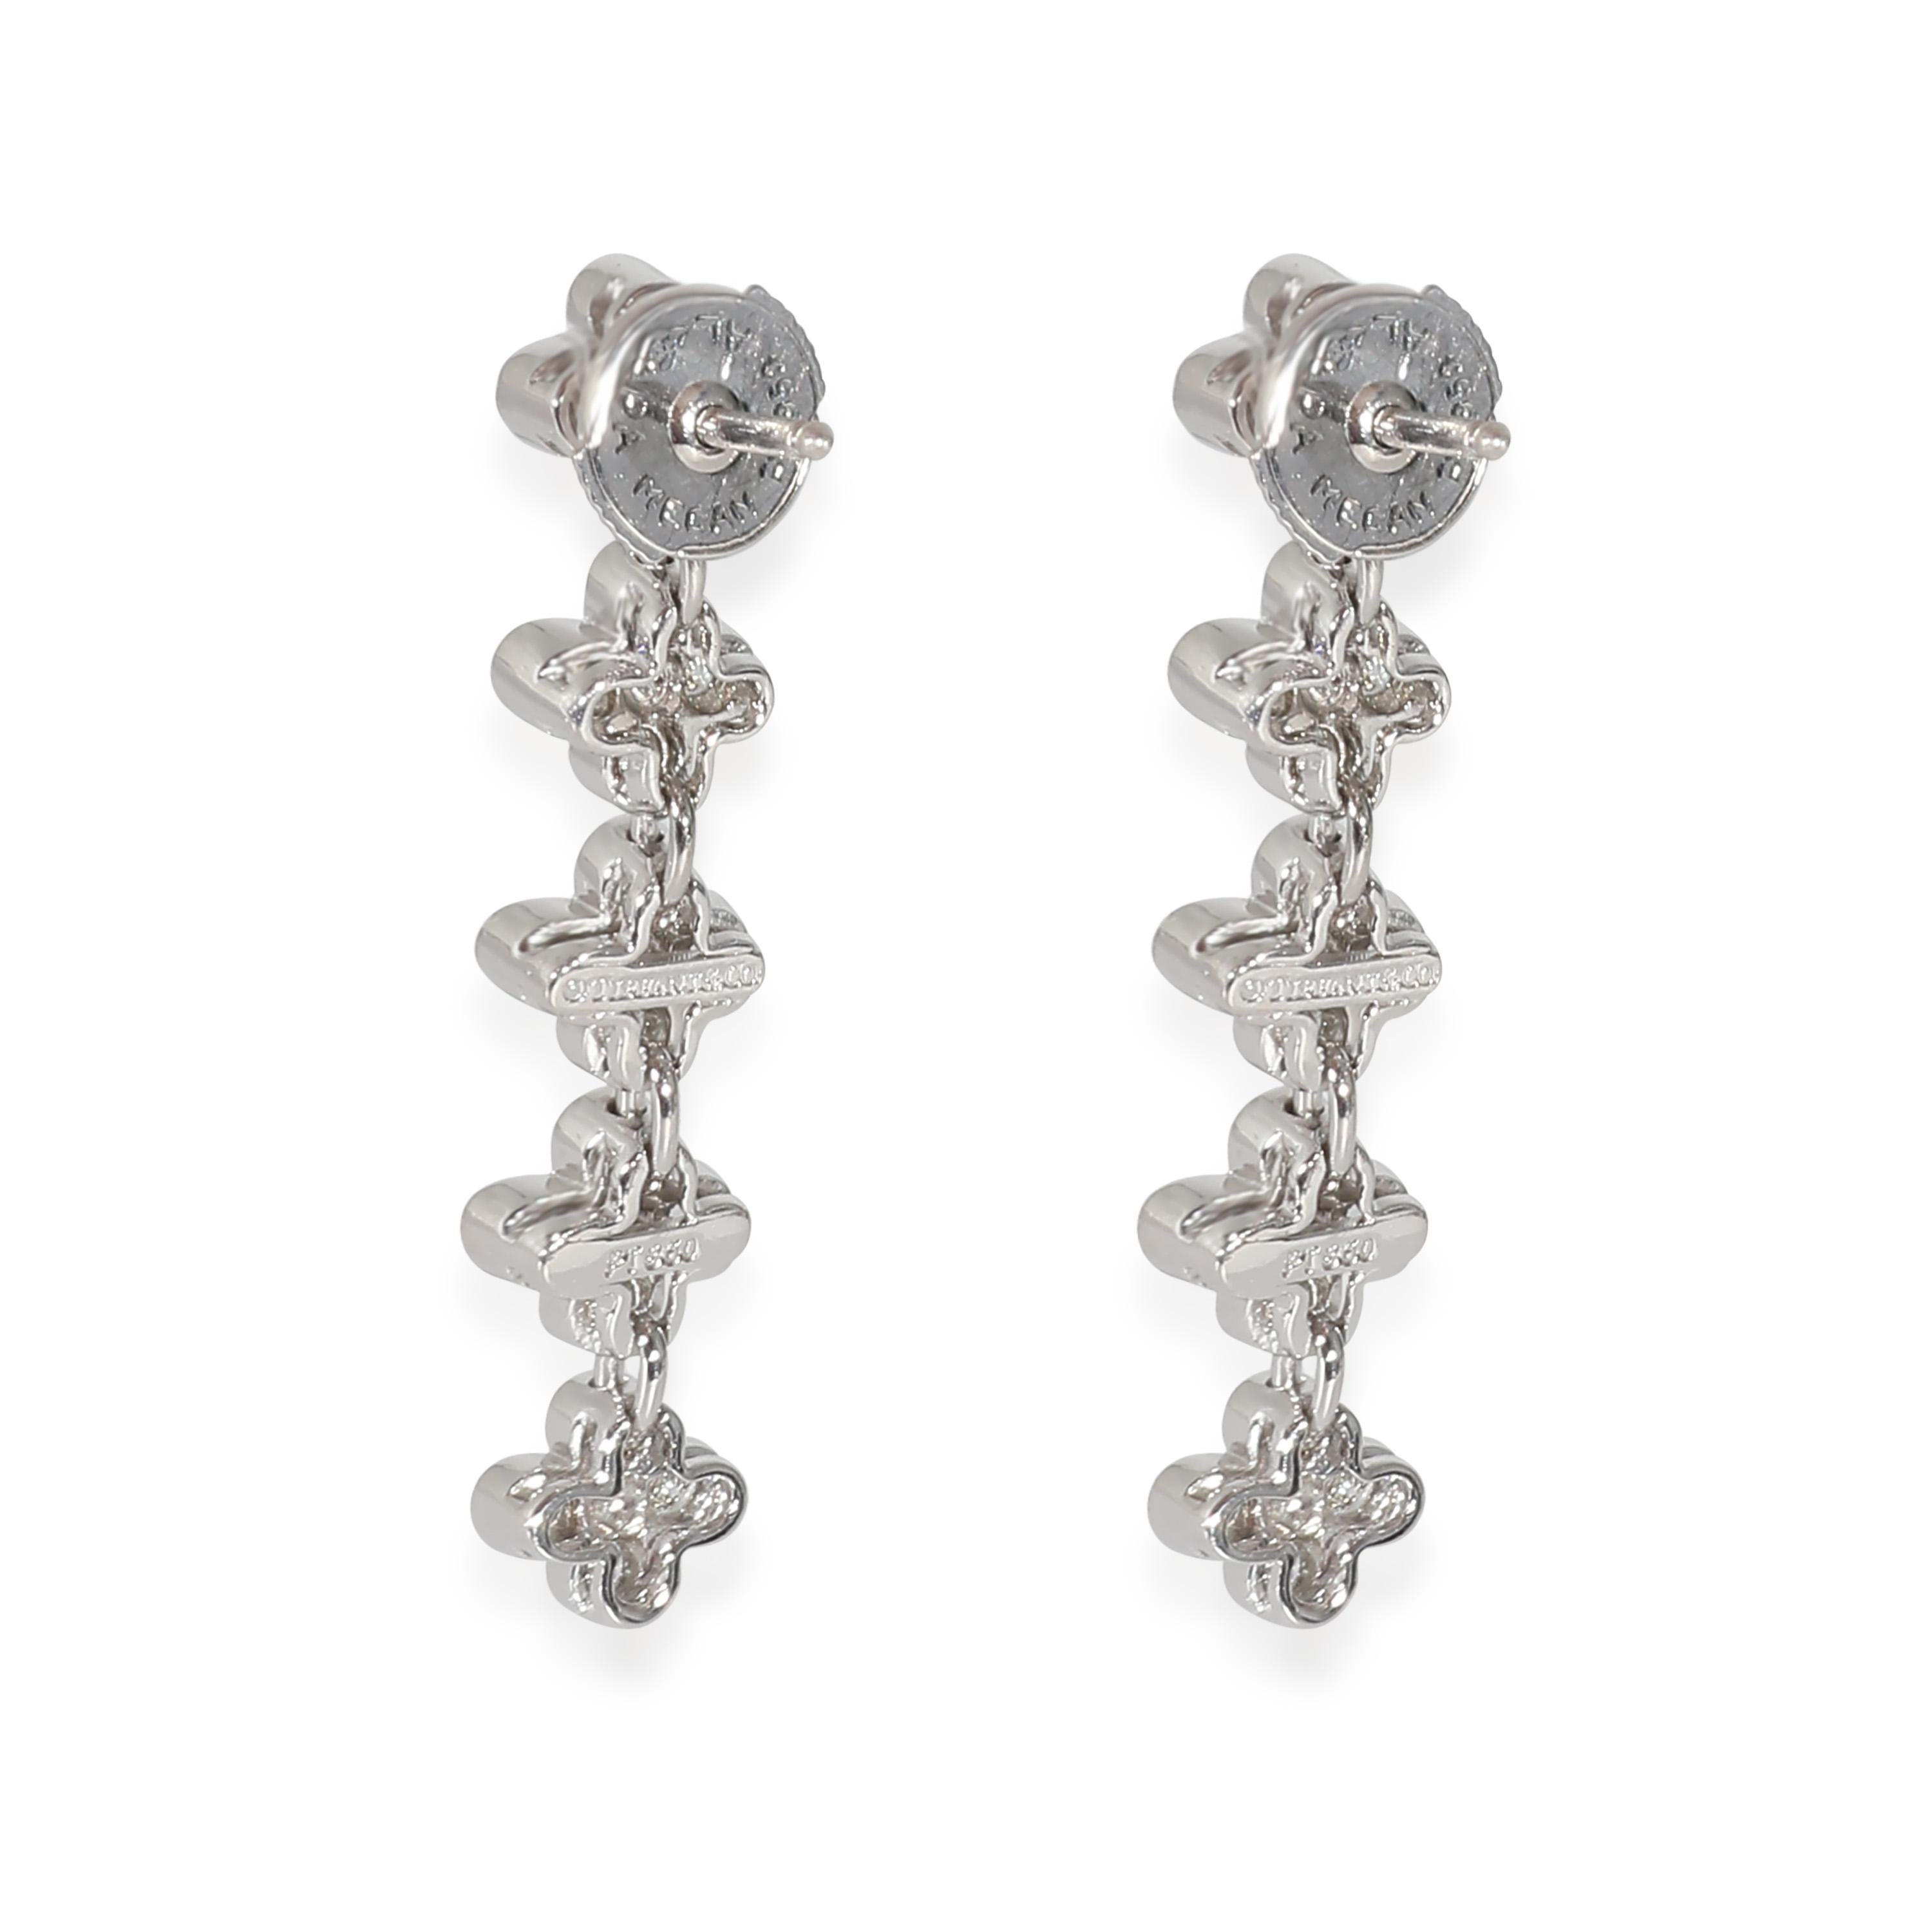 Tiffany & Co. Lace Diamond Long Drop  Earrings in Platinum 0.8 CTW

PRIMARY DETAILS
SKU: 135332
Listing Title: Tiffany & Co. Lace Diamond Long Drop  Earrings in Platinum 0.8 CTW
Condition Description: Retails for 8500 USD. In excellent condition and